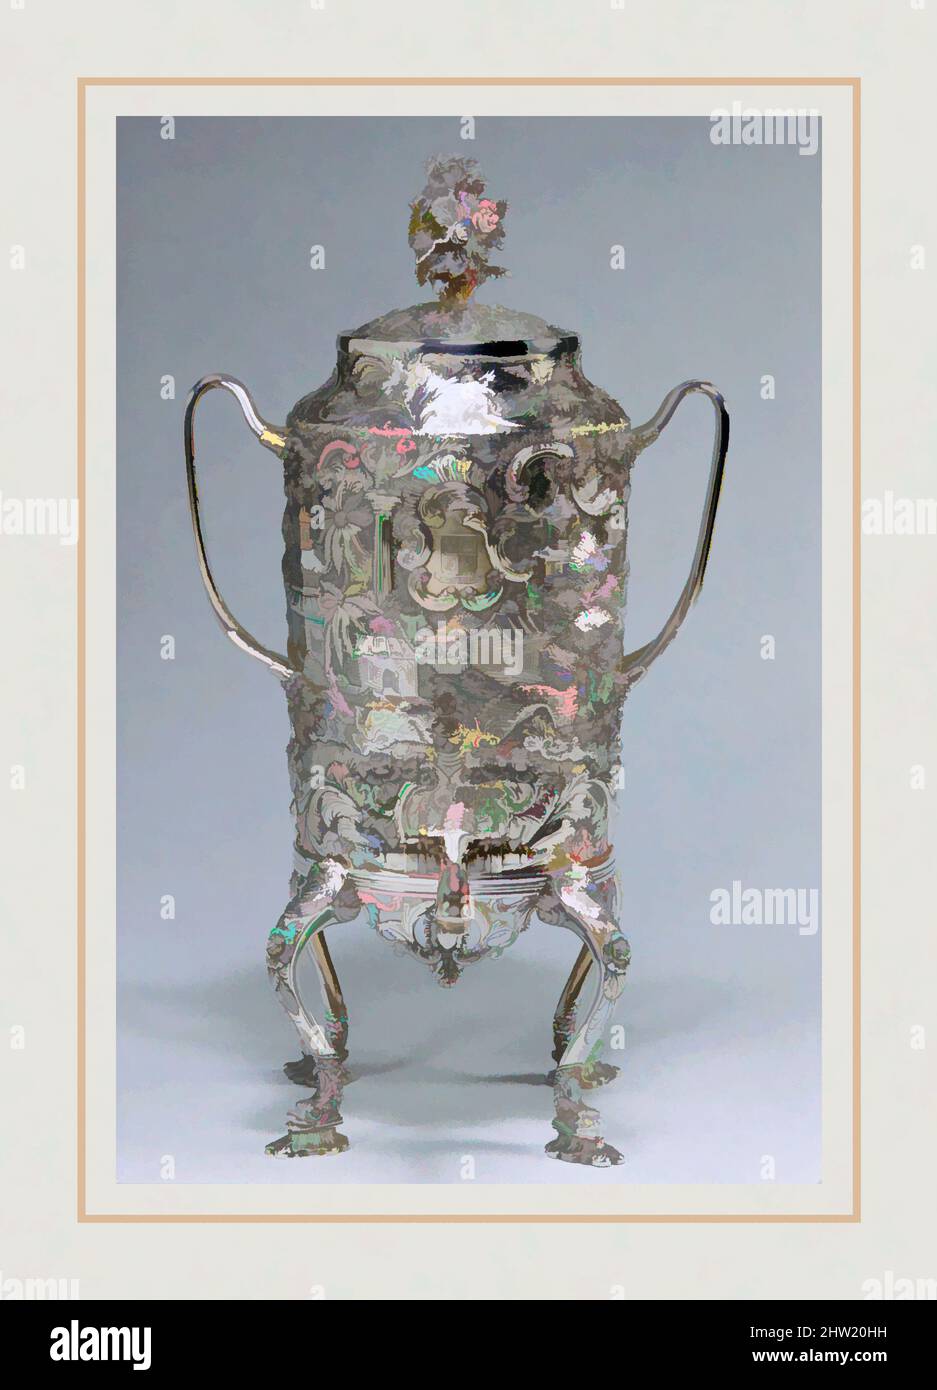 Art inspired by Coffee Urn, 1845, Made in Baltimore, Maryland, United States, American, Silver, Overall: 15 3/8 x 8 5/8 x 8 13/16 in. (39.1 x 21.9 x 22.4 cm); 91 oz. 7 dwt. (2841.9 g), Silver, Andrew Ellicott Warner (1786–1870, Classic works modernized by Artotop with a splash of modernity. Shapes, color and value, eye-catching visual impact on art. Emotions through freedom of artworks in a contemporary way. A timeless message pursuing a wildly creative new direction. Artists turning to the digital medium and creating the Artotop NFT Stock Photo